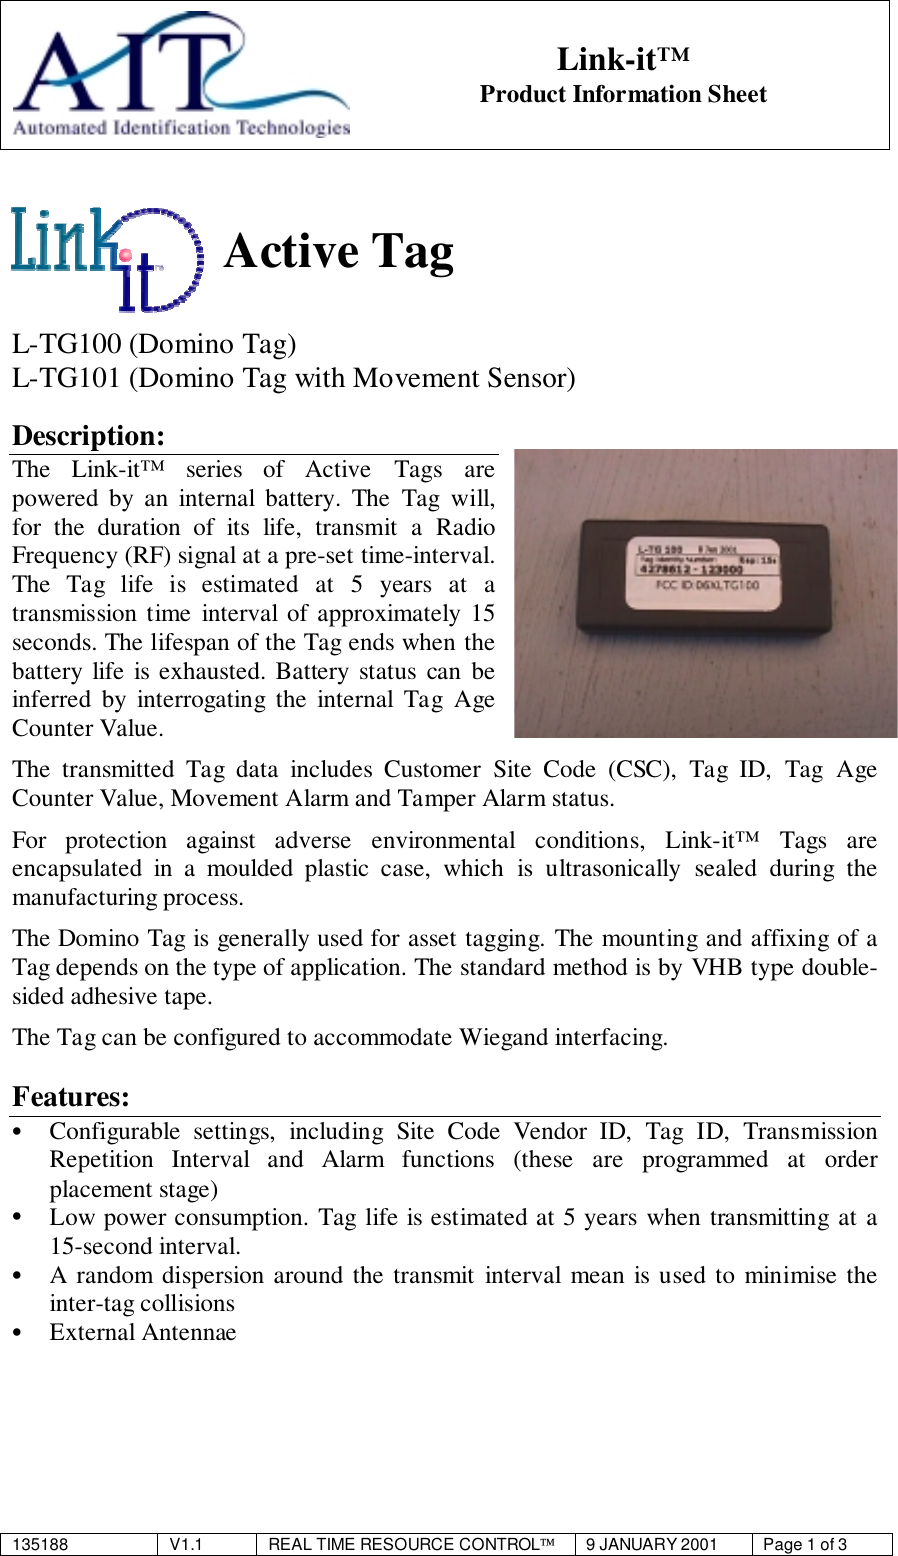 135188 V1.1 REAL TIME RESOURCE CONTROL9 JANUARY 2001 Page 1 of 3Link-it™Product Information SheetActive TagL-TG100 (Domino Tag)L-TG101 (Domino Tag with Movement Sensor)Description:The Link-it™ series of Active Tags arepowered by an internal battery. The Tag will,for the duration of its life, transmit a RadioFrequency (RF) signal at a pre-set time-interval.The Tag life is estimated at 5 years at atransmission time interval of approximately 15seconds. The lifespan of the Tag ends when thebattery life is exhausted. Battery status can beinferred by interrogating the internal Tag AgeCounter Value.The transmitted Tag data includes Customer Site Code (CSC), Tag ID, Tag AgeCounter Value, Movement Alarm and Tamper Alarm status.For protection against adverse environmental conditions, Link-it™ Tags areencapsulated in a moulded plastic case, which is ultrasonically sealed during themanufacturing process.The Domino Tag is generally used for asset tagging. The mounting and affixing of aTag depends on the type of application. The standard method is by VHB type double-sided adhesive tape.The Tag can be configured to accommodate Wiegand interfacing.Features:• Configurable settings, including Site Code Vendor ID, Tag ID, TransmissionRepetition Interval and Alarm functions (these are programmed at orderplacement stage)• Low power consumption. Tag life is estimated at 5 years when transmitting at a15-second interval.• A random dispersion around the transmit interval mean is used to minimise theinter-tag collisions• External Antennae